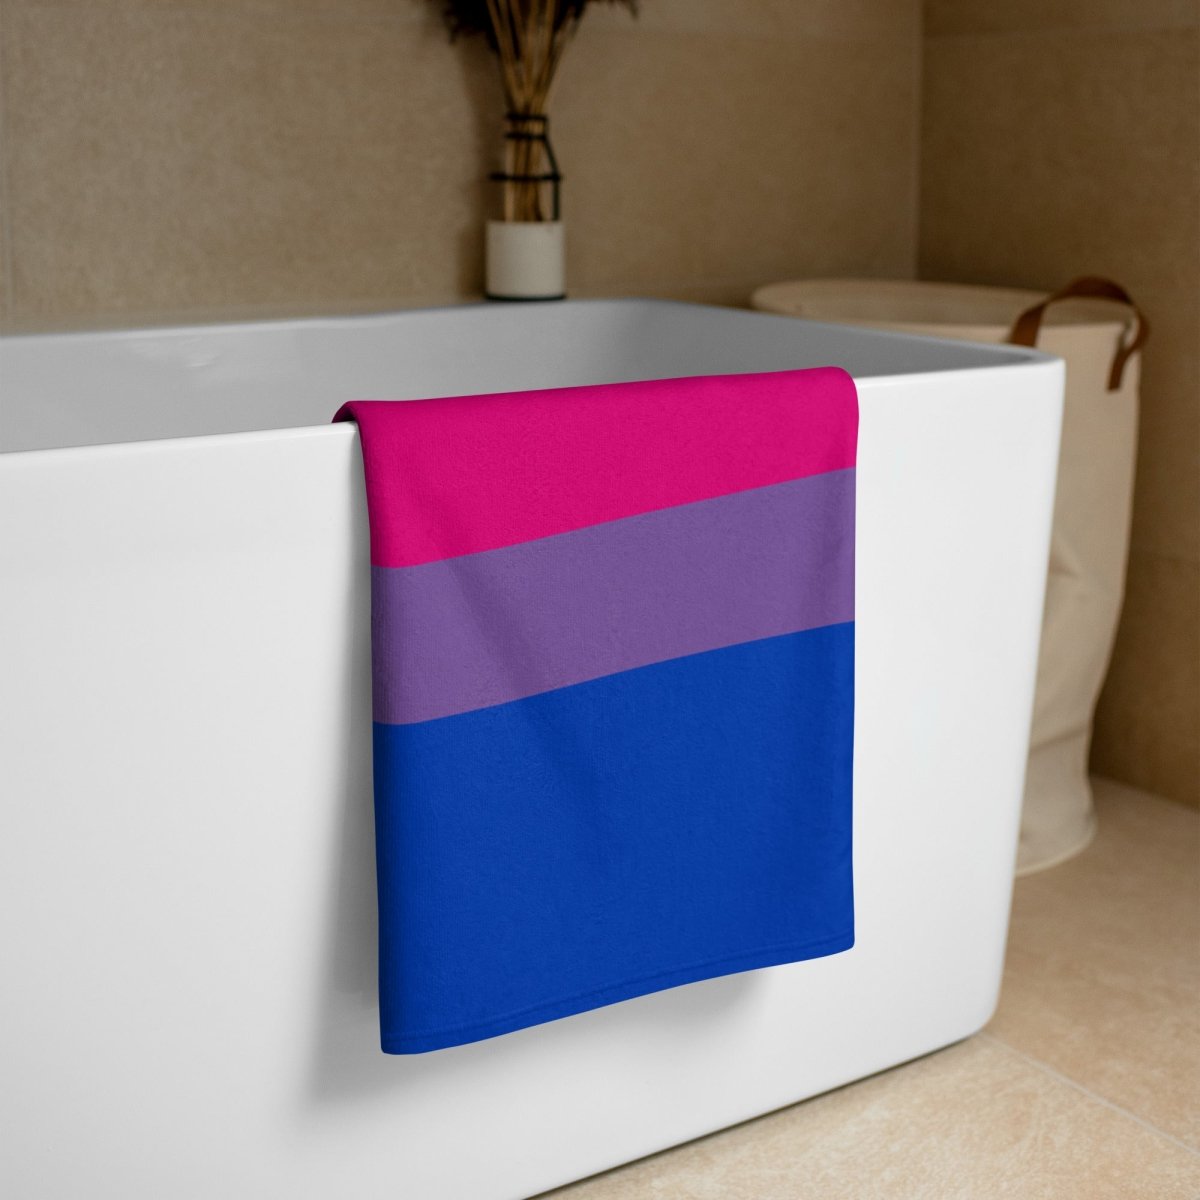 Bisexual Flag Beach Towel - On Trend Shirts